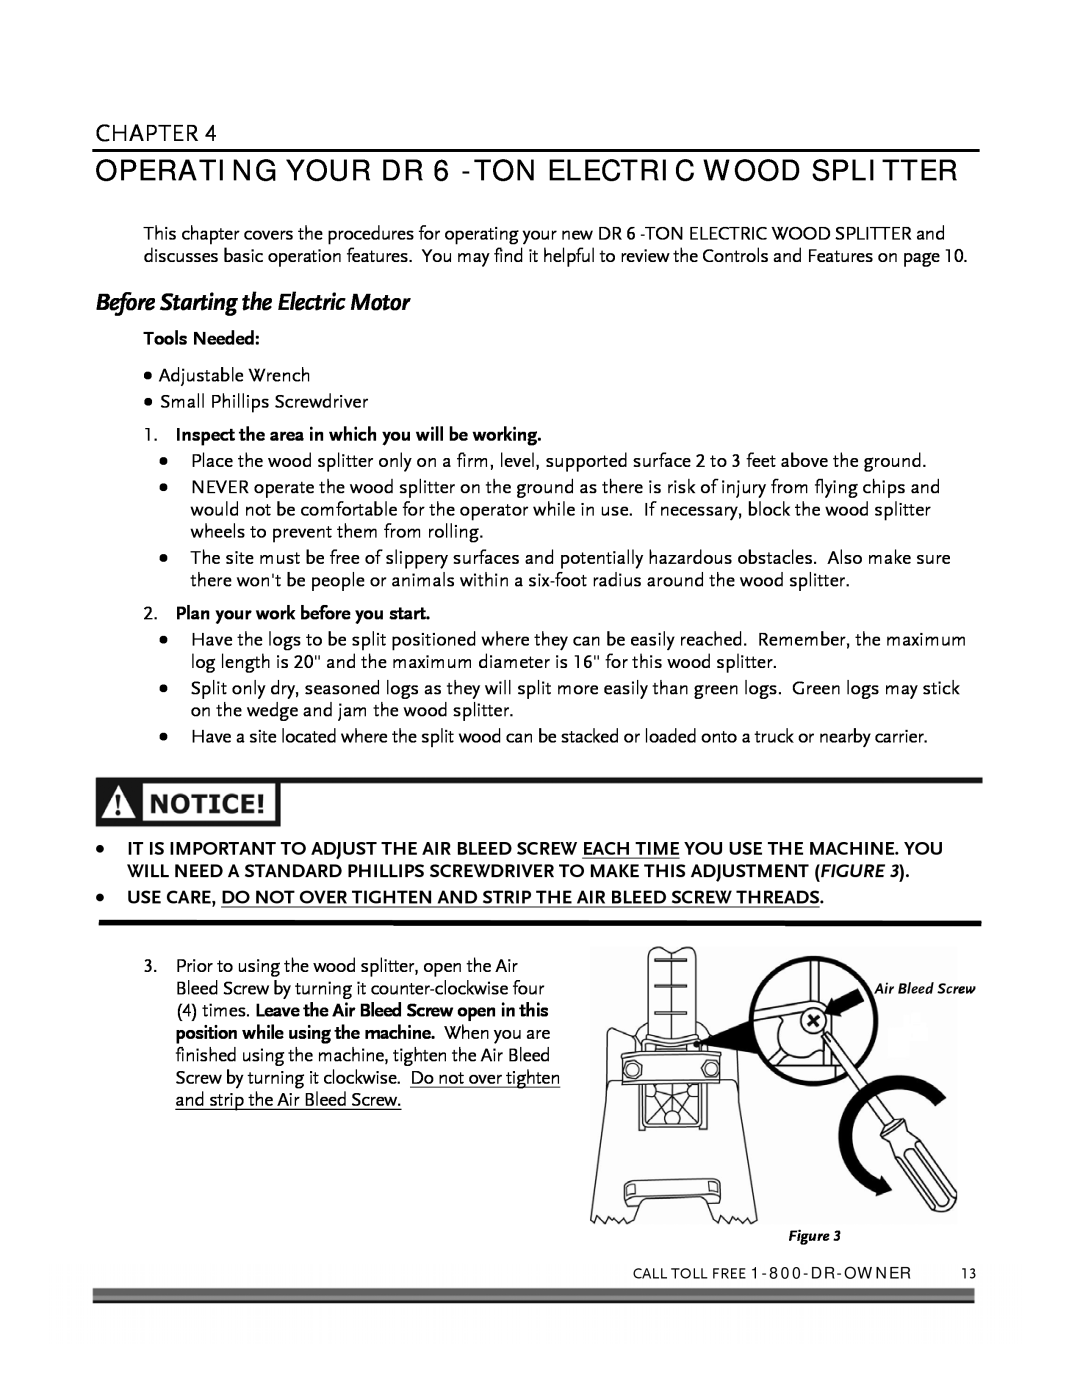 Country Home Products manual OPERATING YOUR DR 6 -TONELECTRIC WOOD SPLITTER, Before Starting the Electric Motor, Chapter 